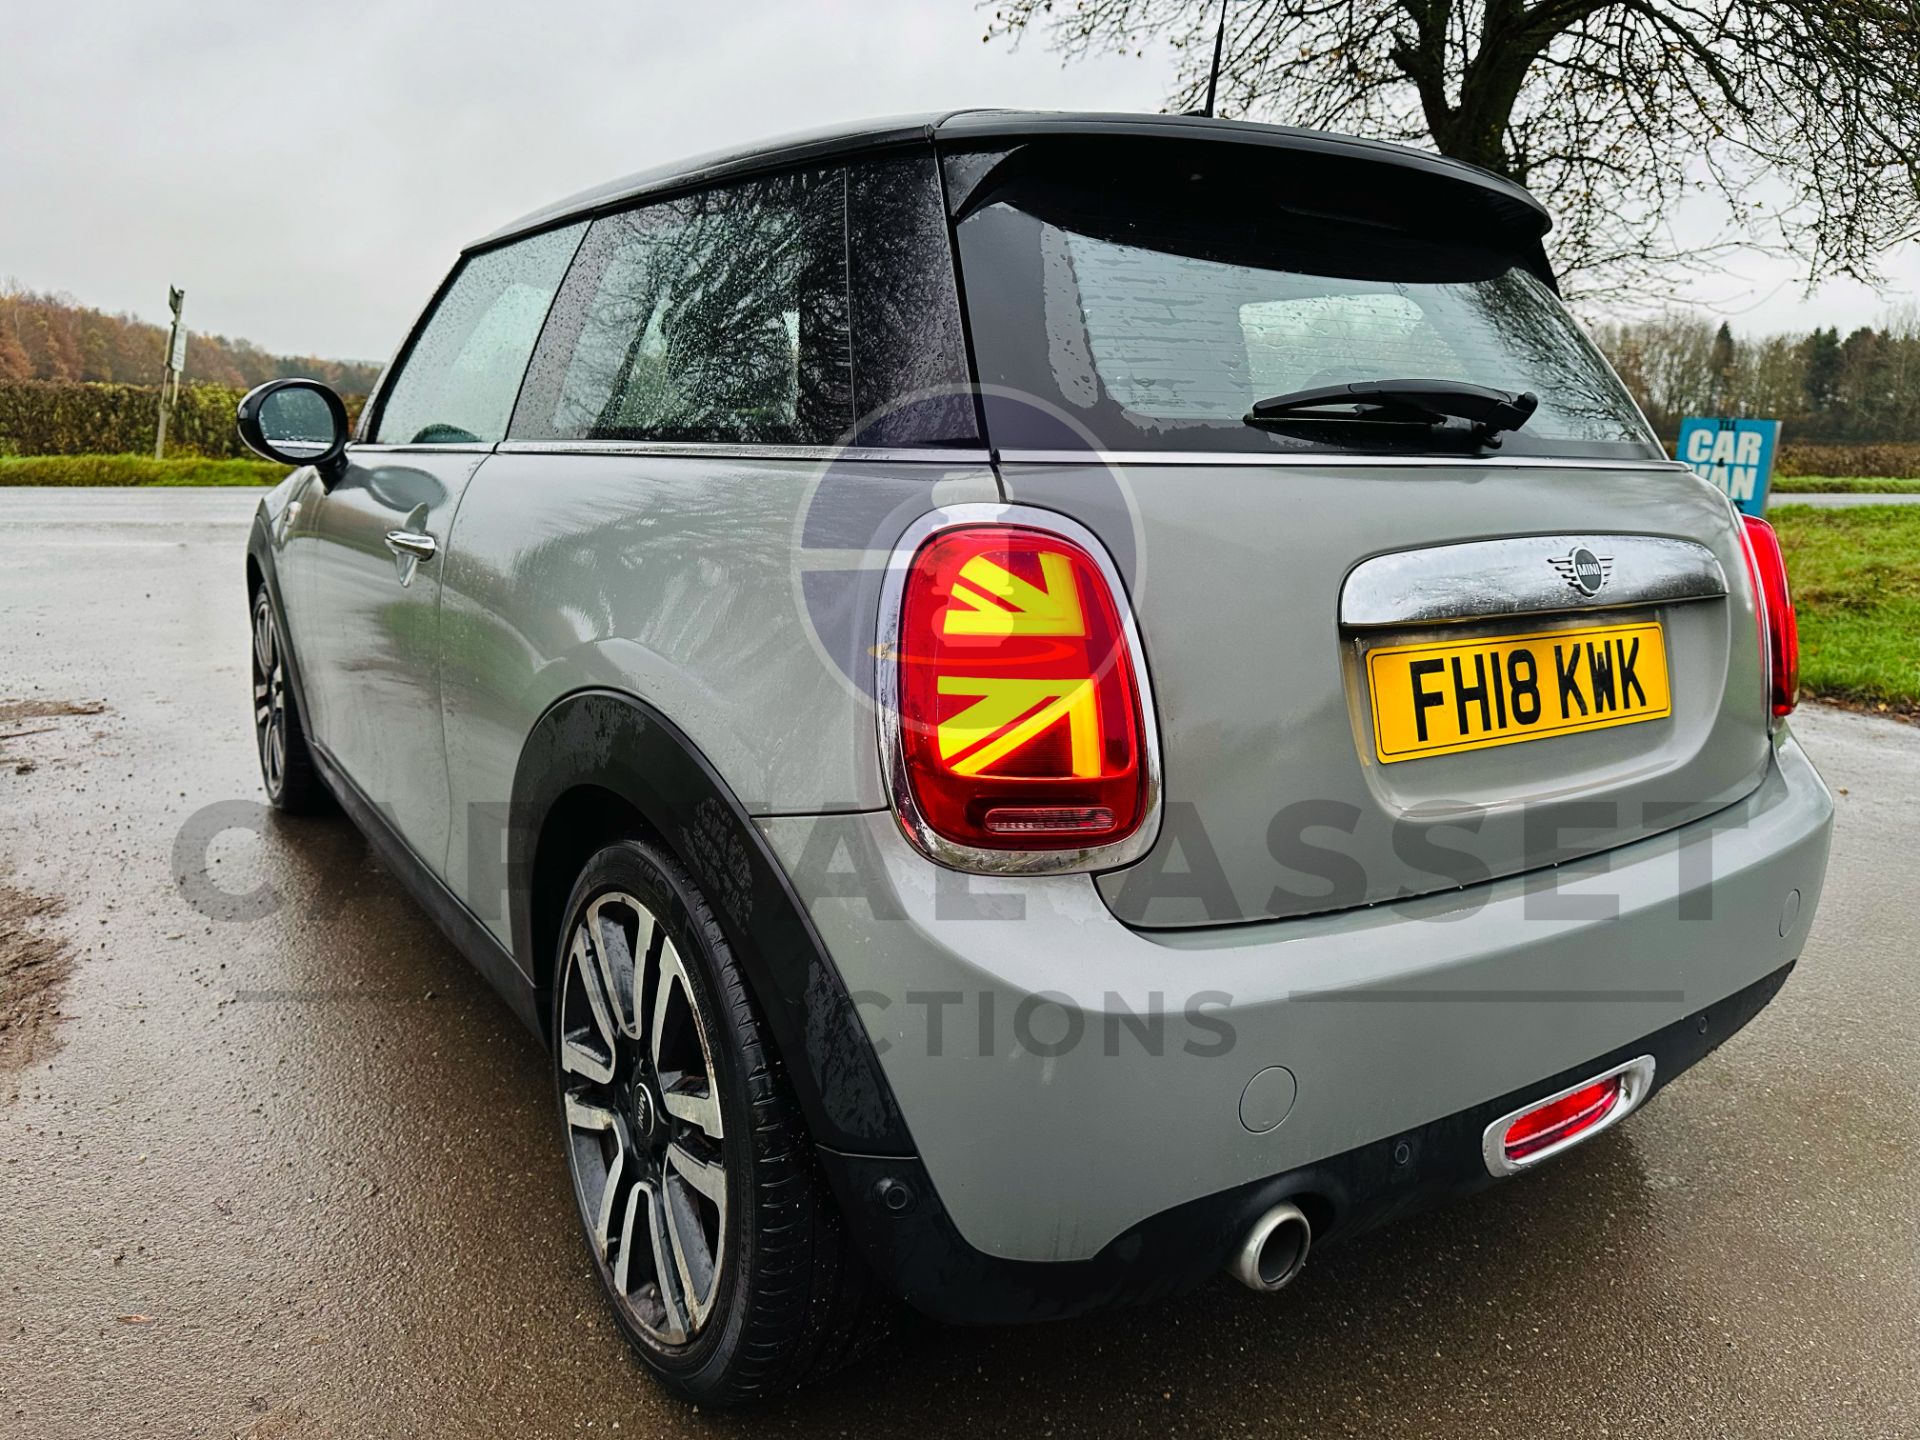 (ON SALE) MINI ONE 1.5 PETROL (18 REG) - START / STOP -AIR CONDITIONING -ONLY 35K MILES - NO VAT! - Image 11 of 39